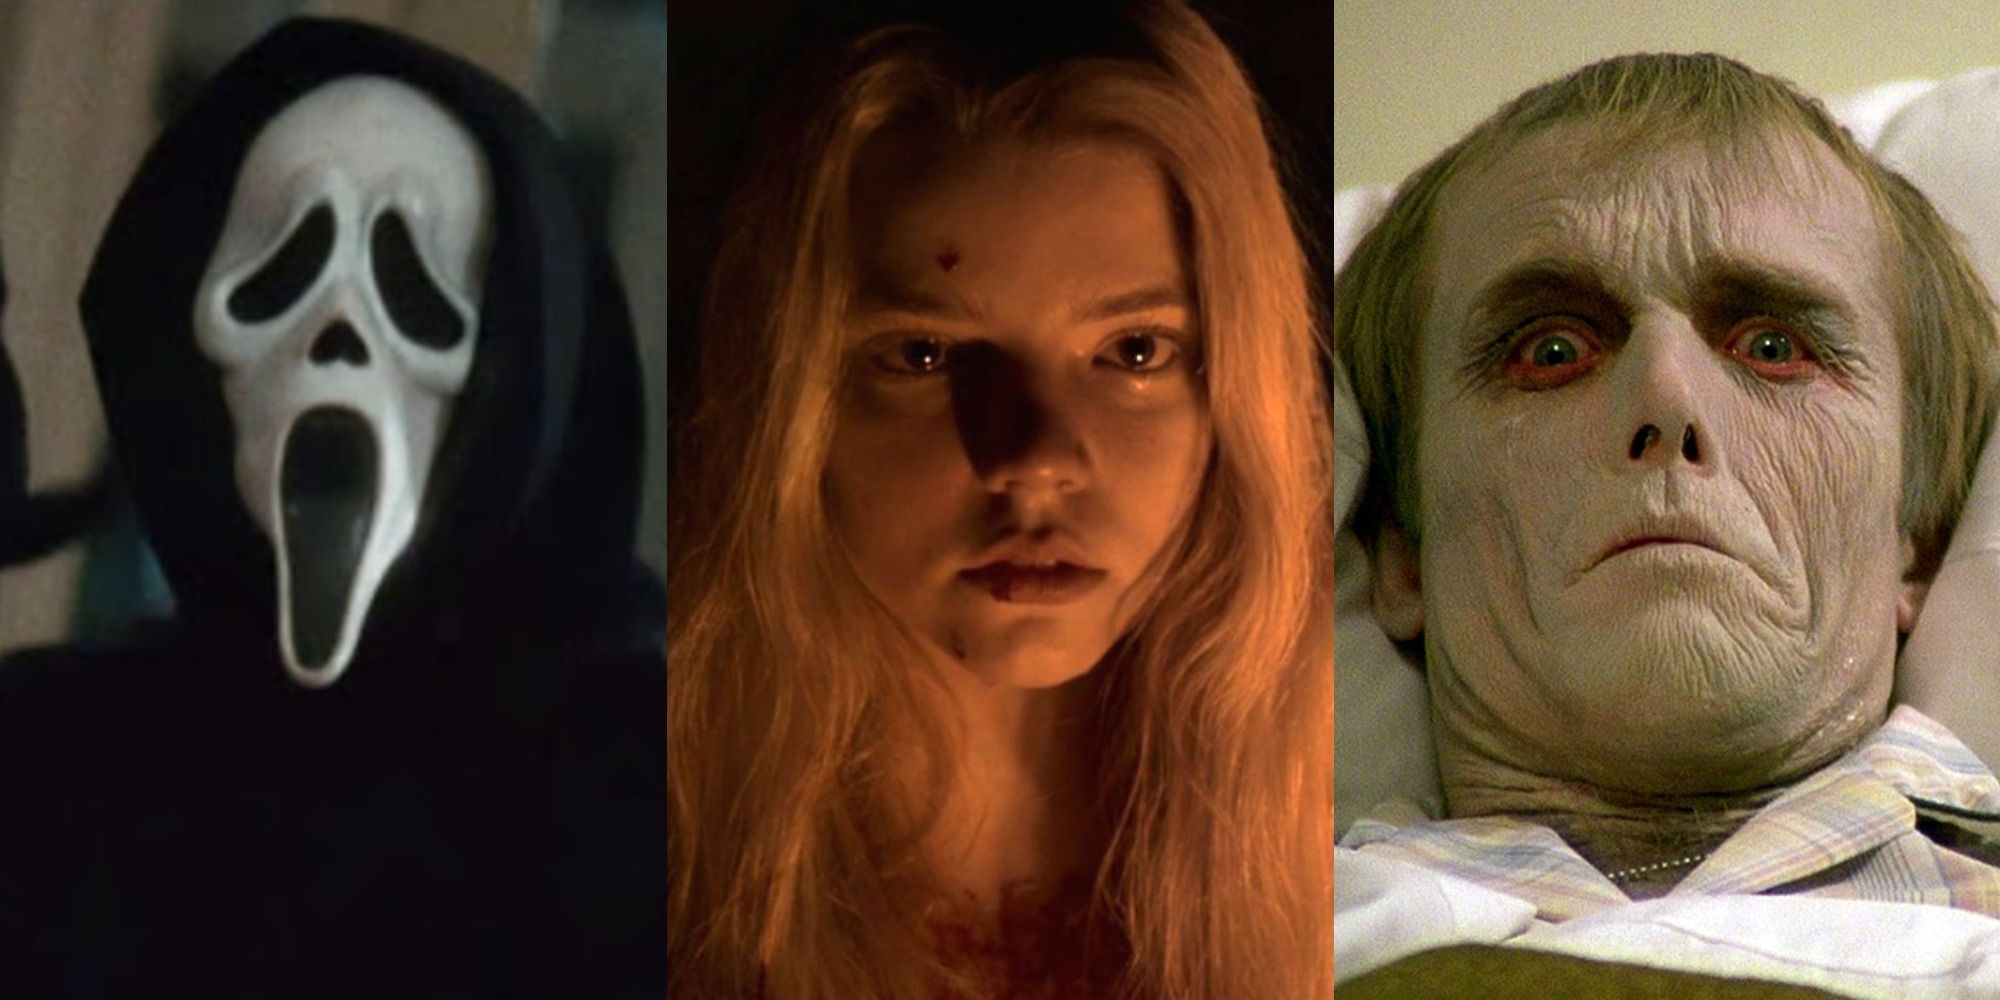 10 Unpopular Opinions About The Horror Movie Genre According To Reddit